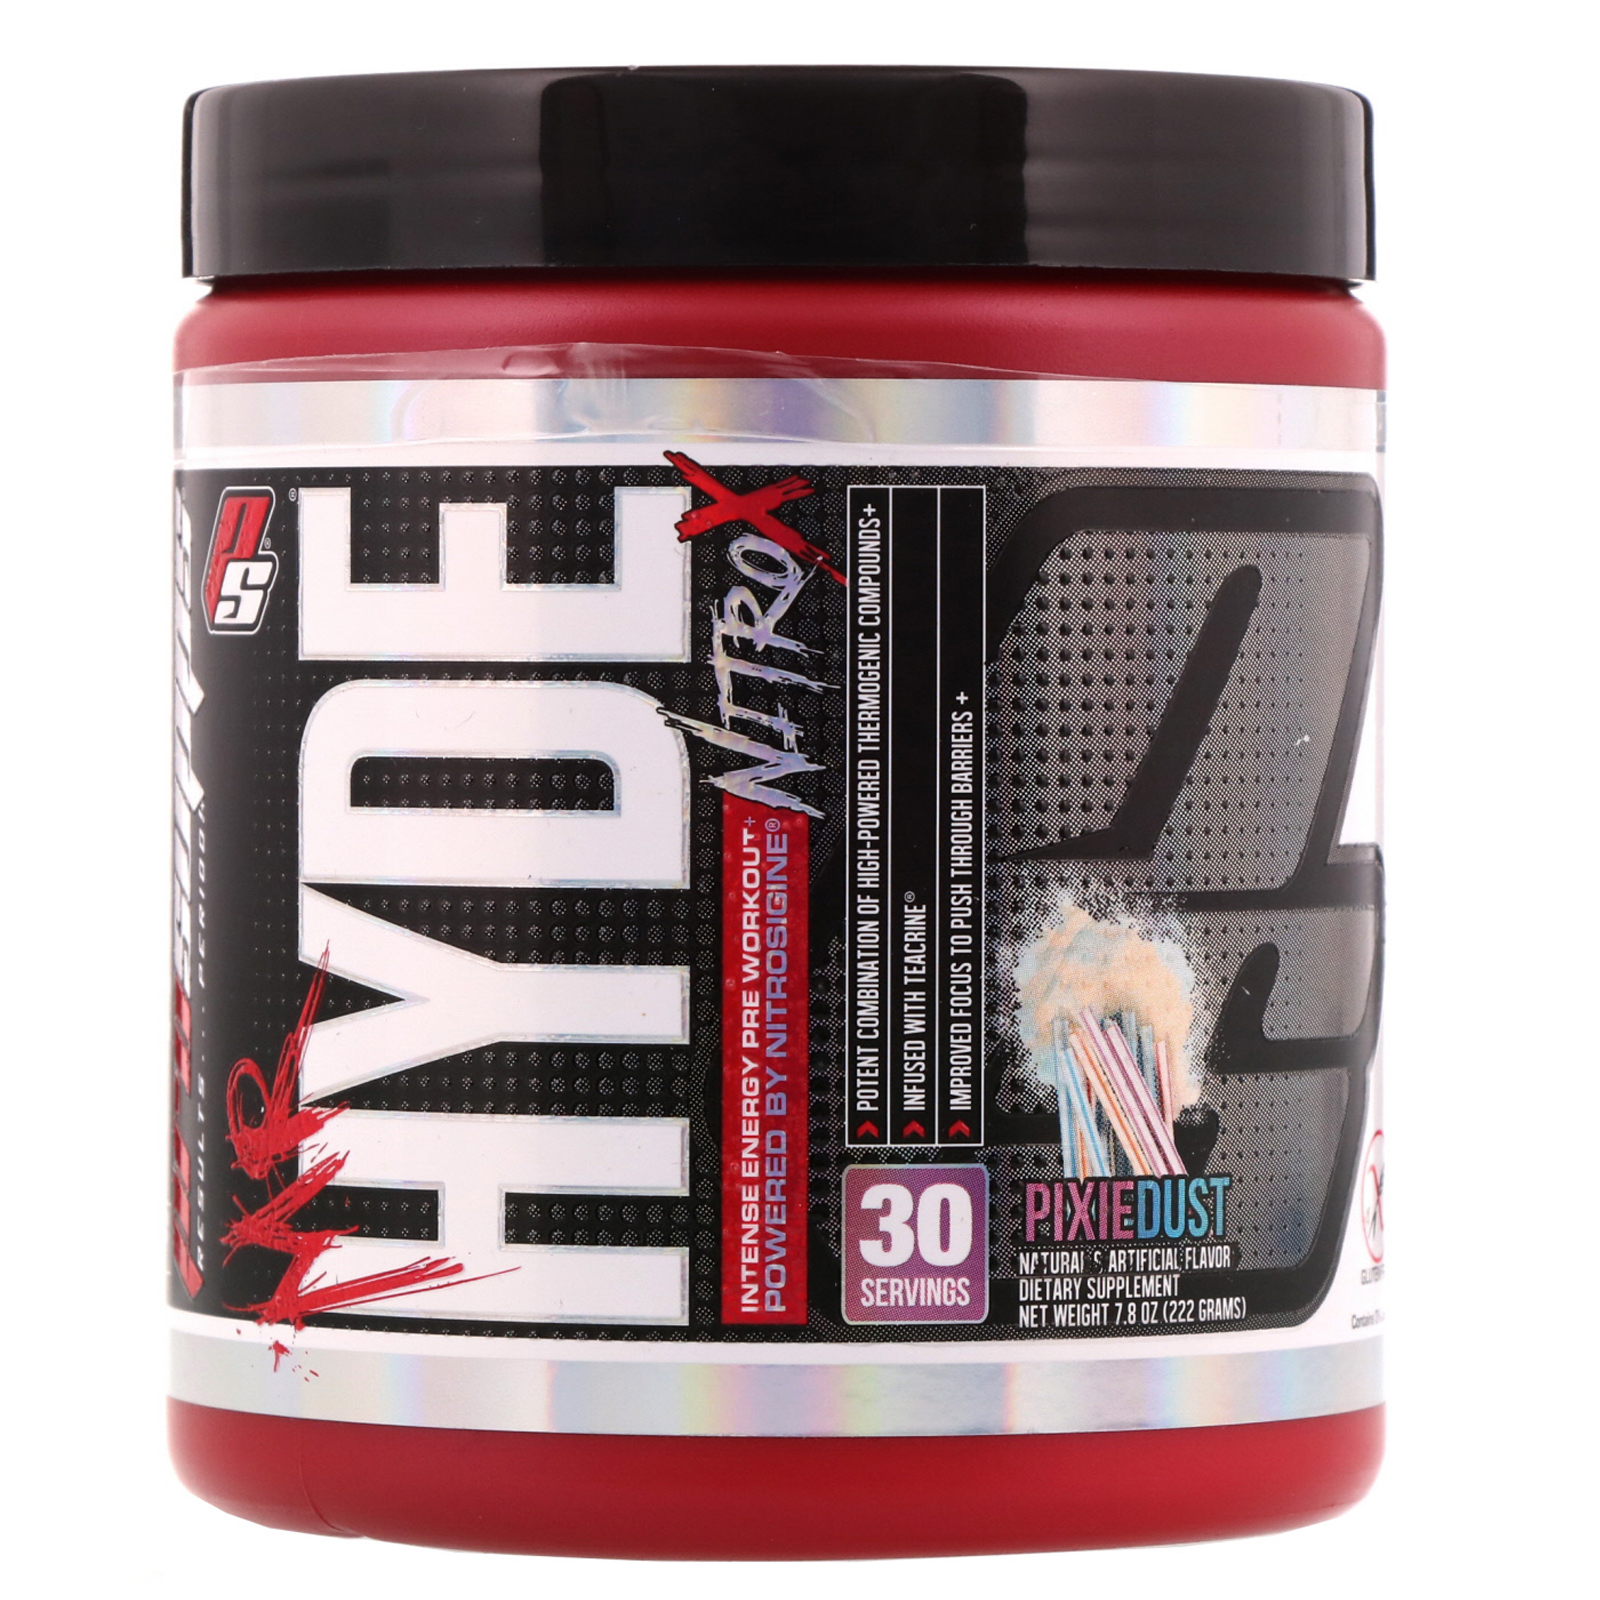 5 Day Mr Hyde Pre Workout Amazon for Fat Body